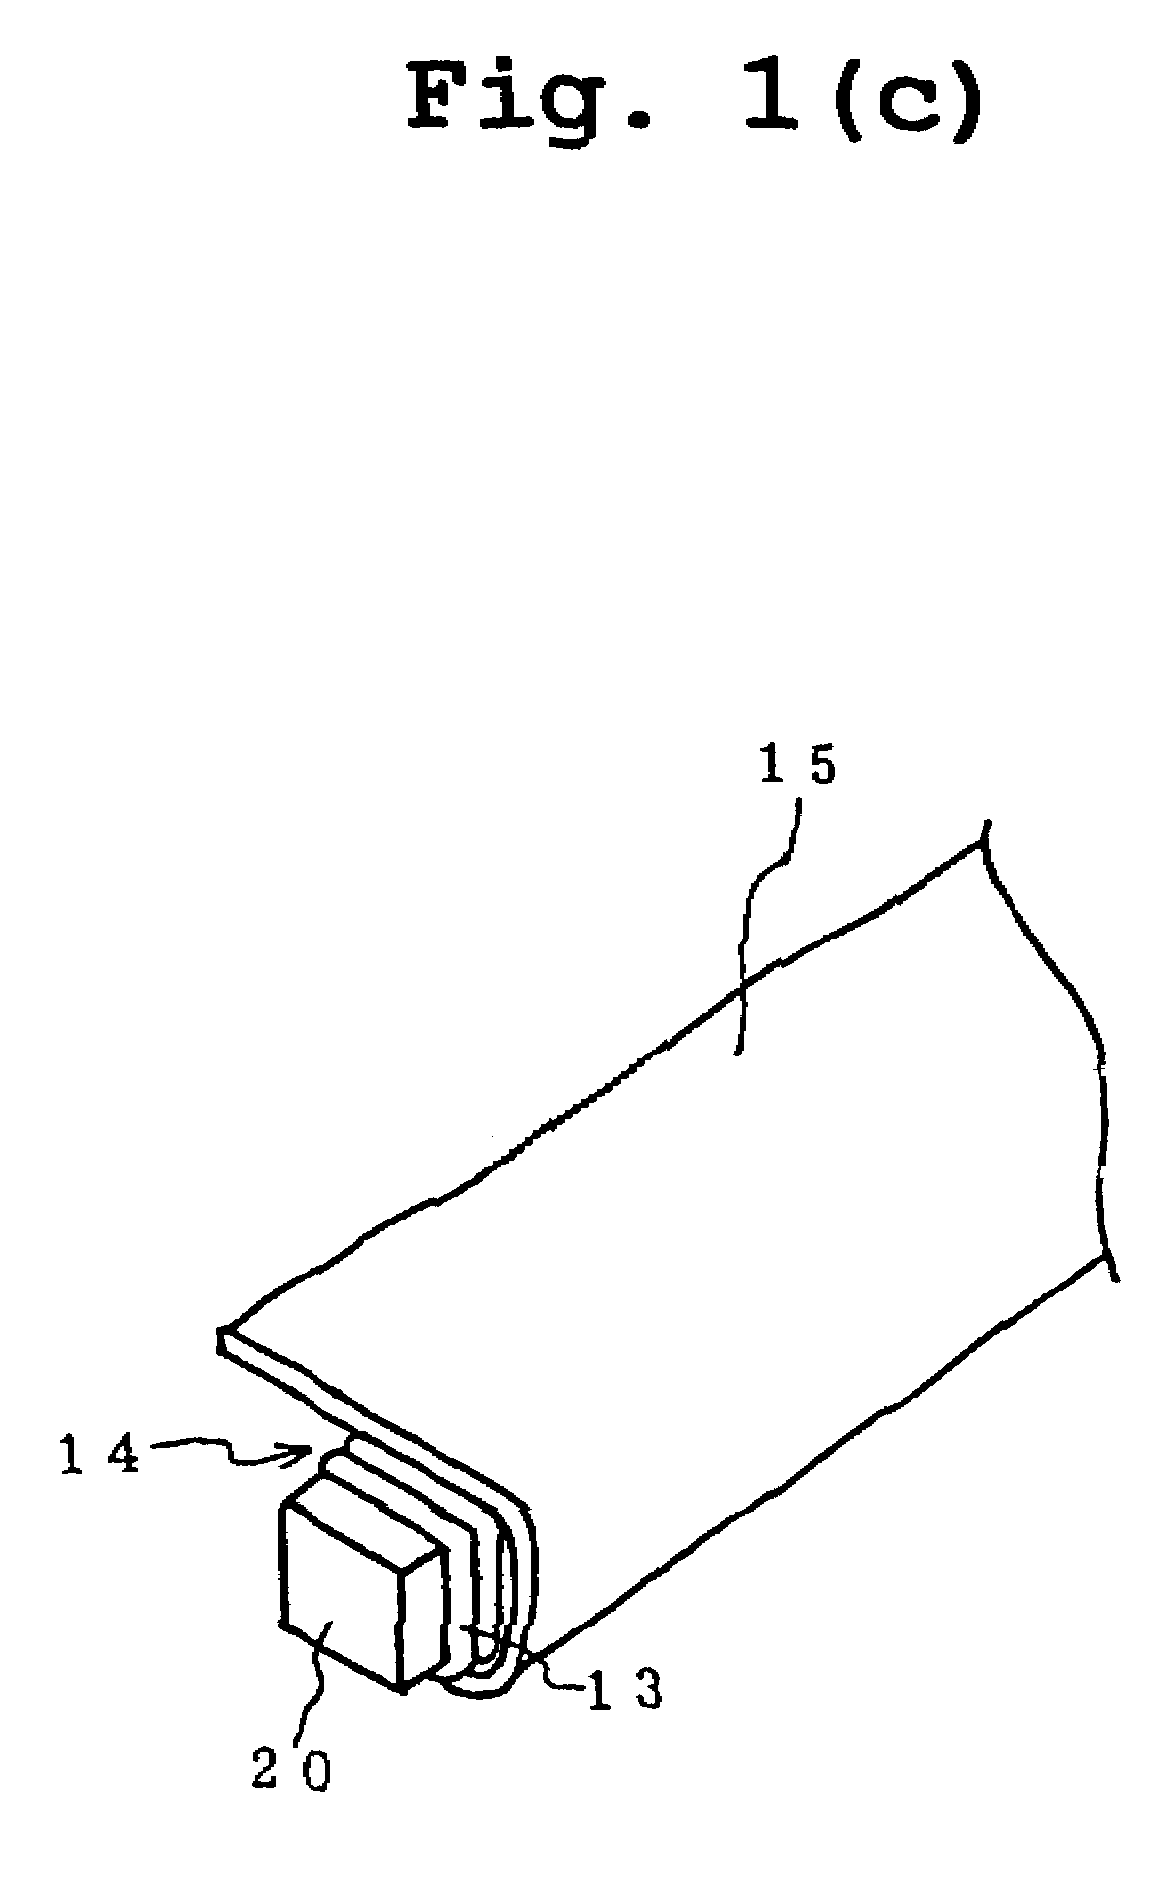 Method of manufacturing an anisotropic conductive film